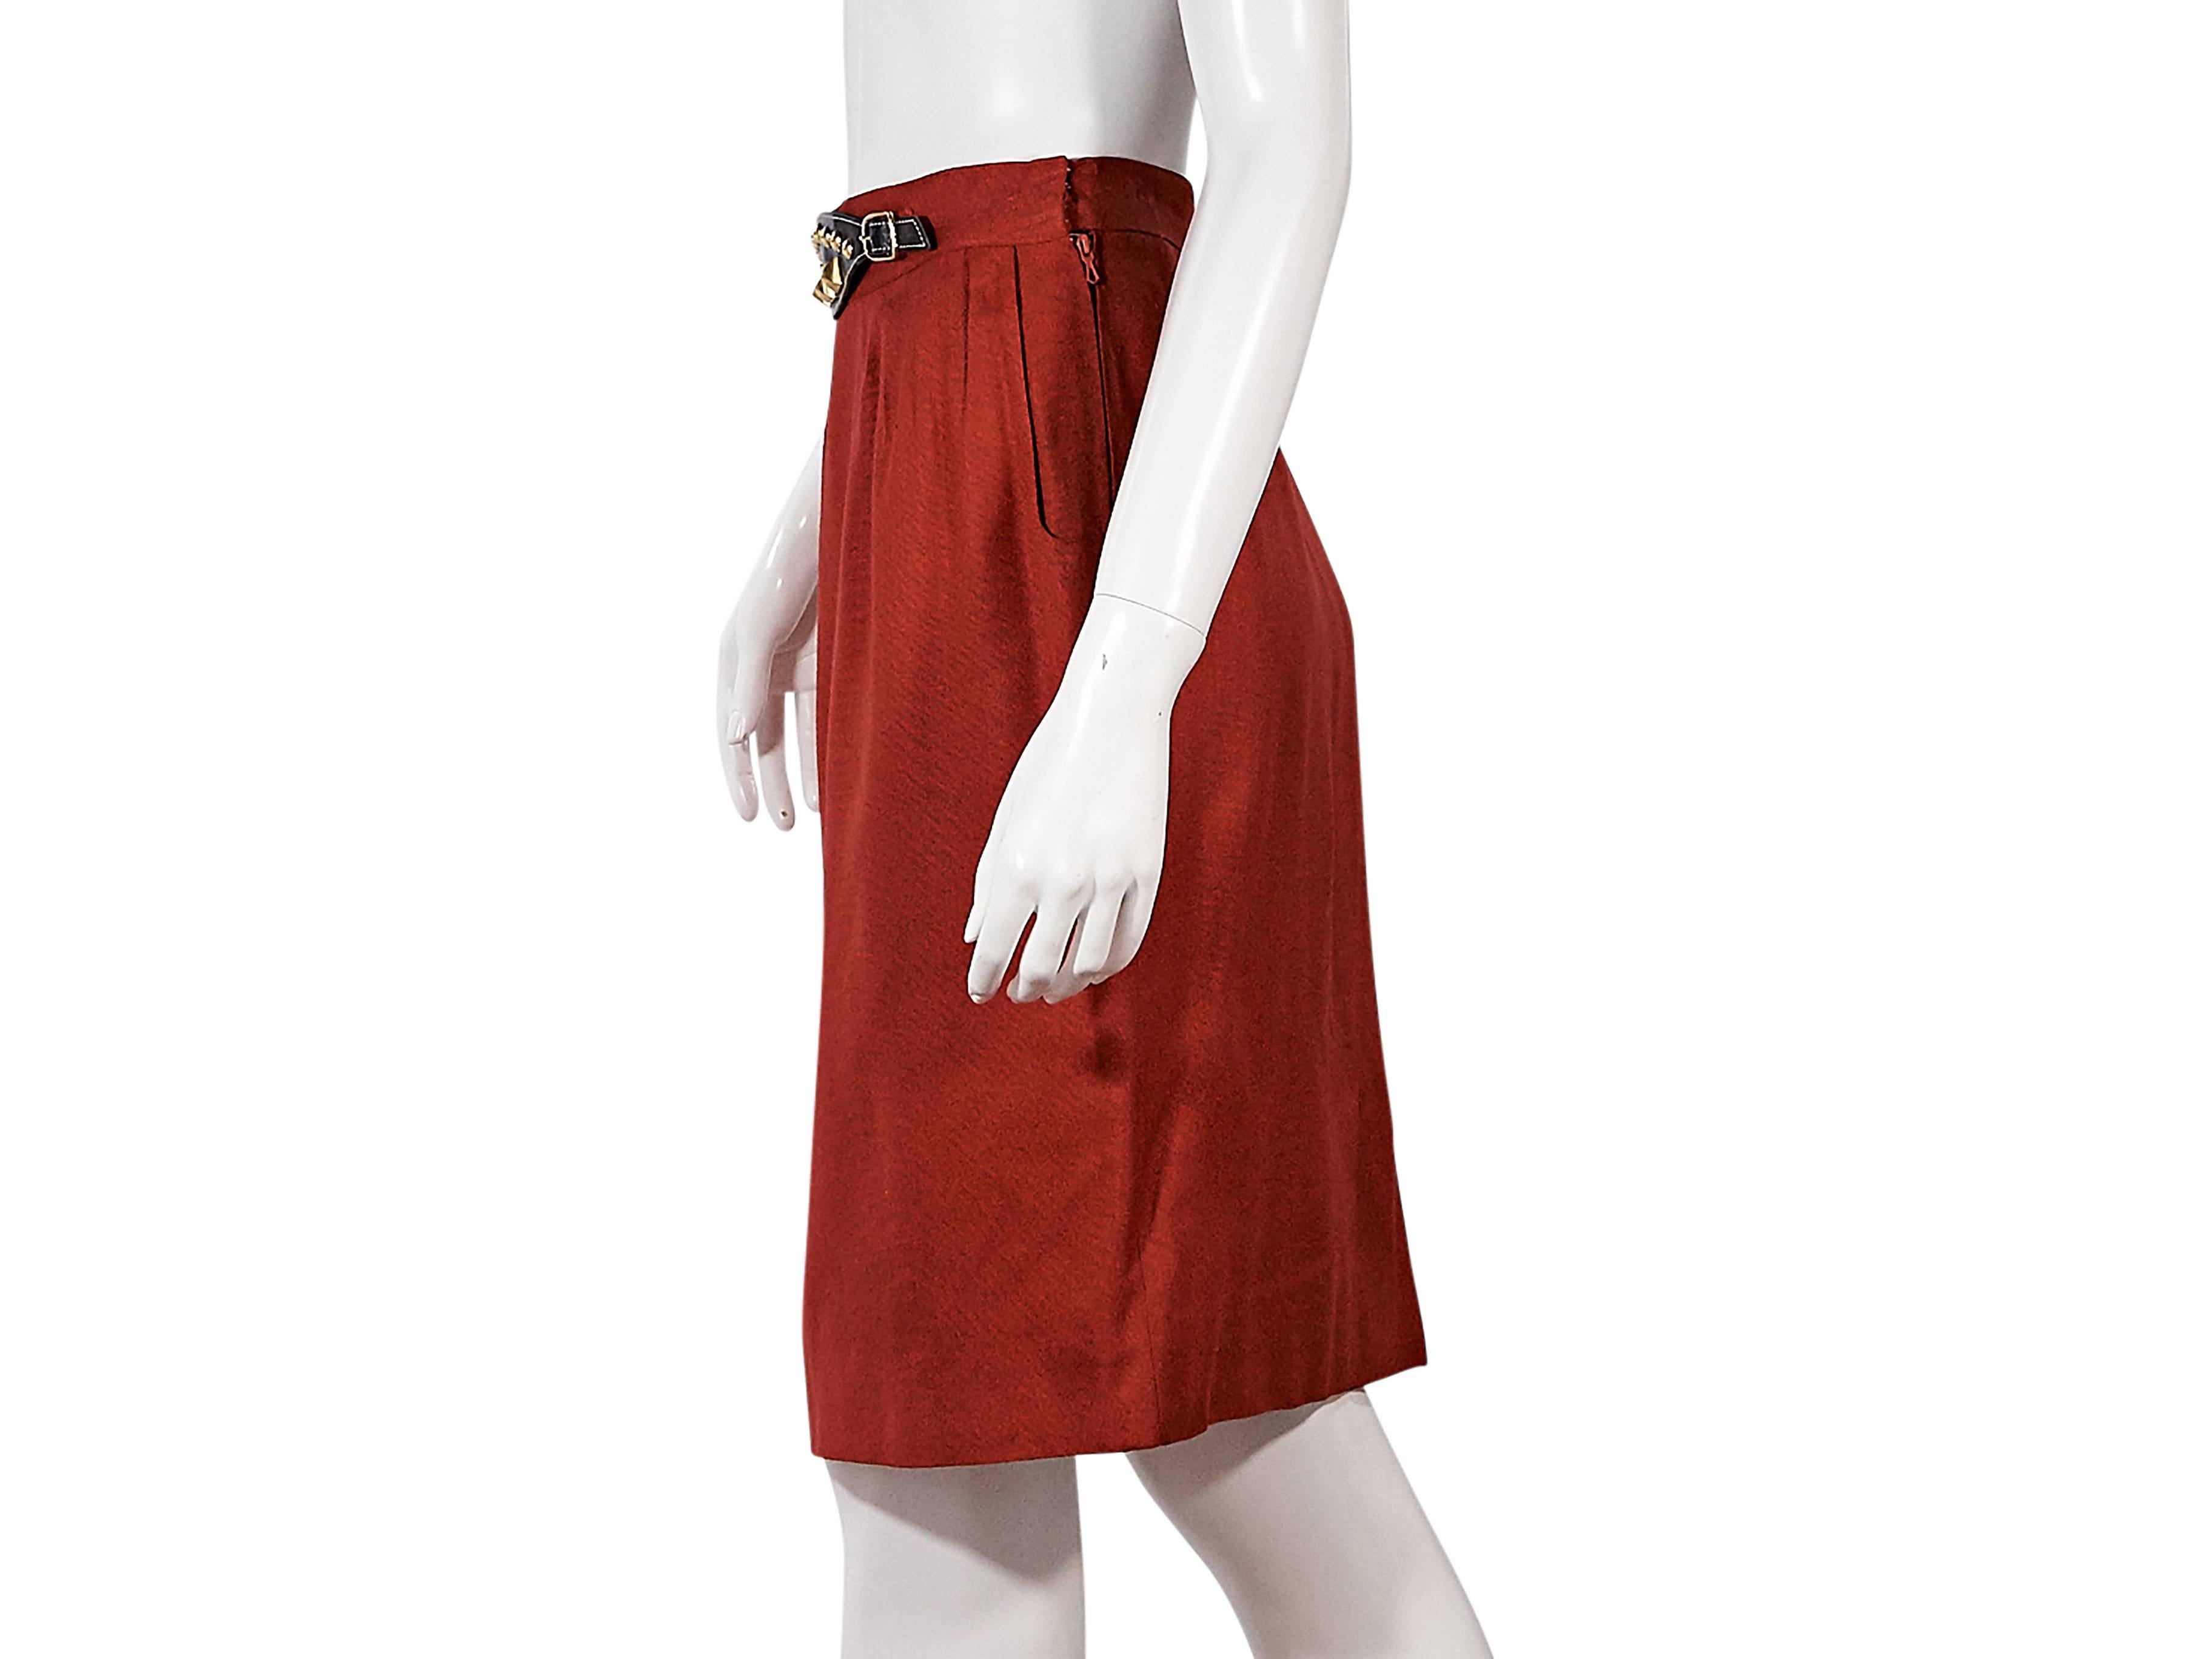 Product details:  Red vintage pencil skirt by Hermès.  Banded waist accented with faux belt buckle.  Pleats taper off waist.  Concealed side hook and zip closure.  Back center hem vent.  Goldtone hardware.  Label size FR 40. 
Condition: Pre-owned.